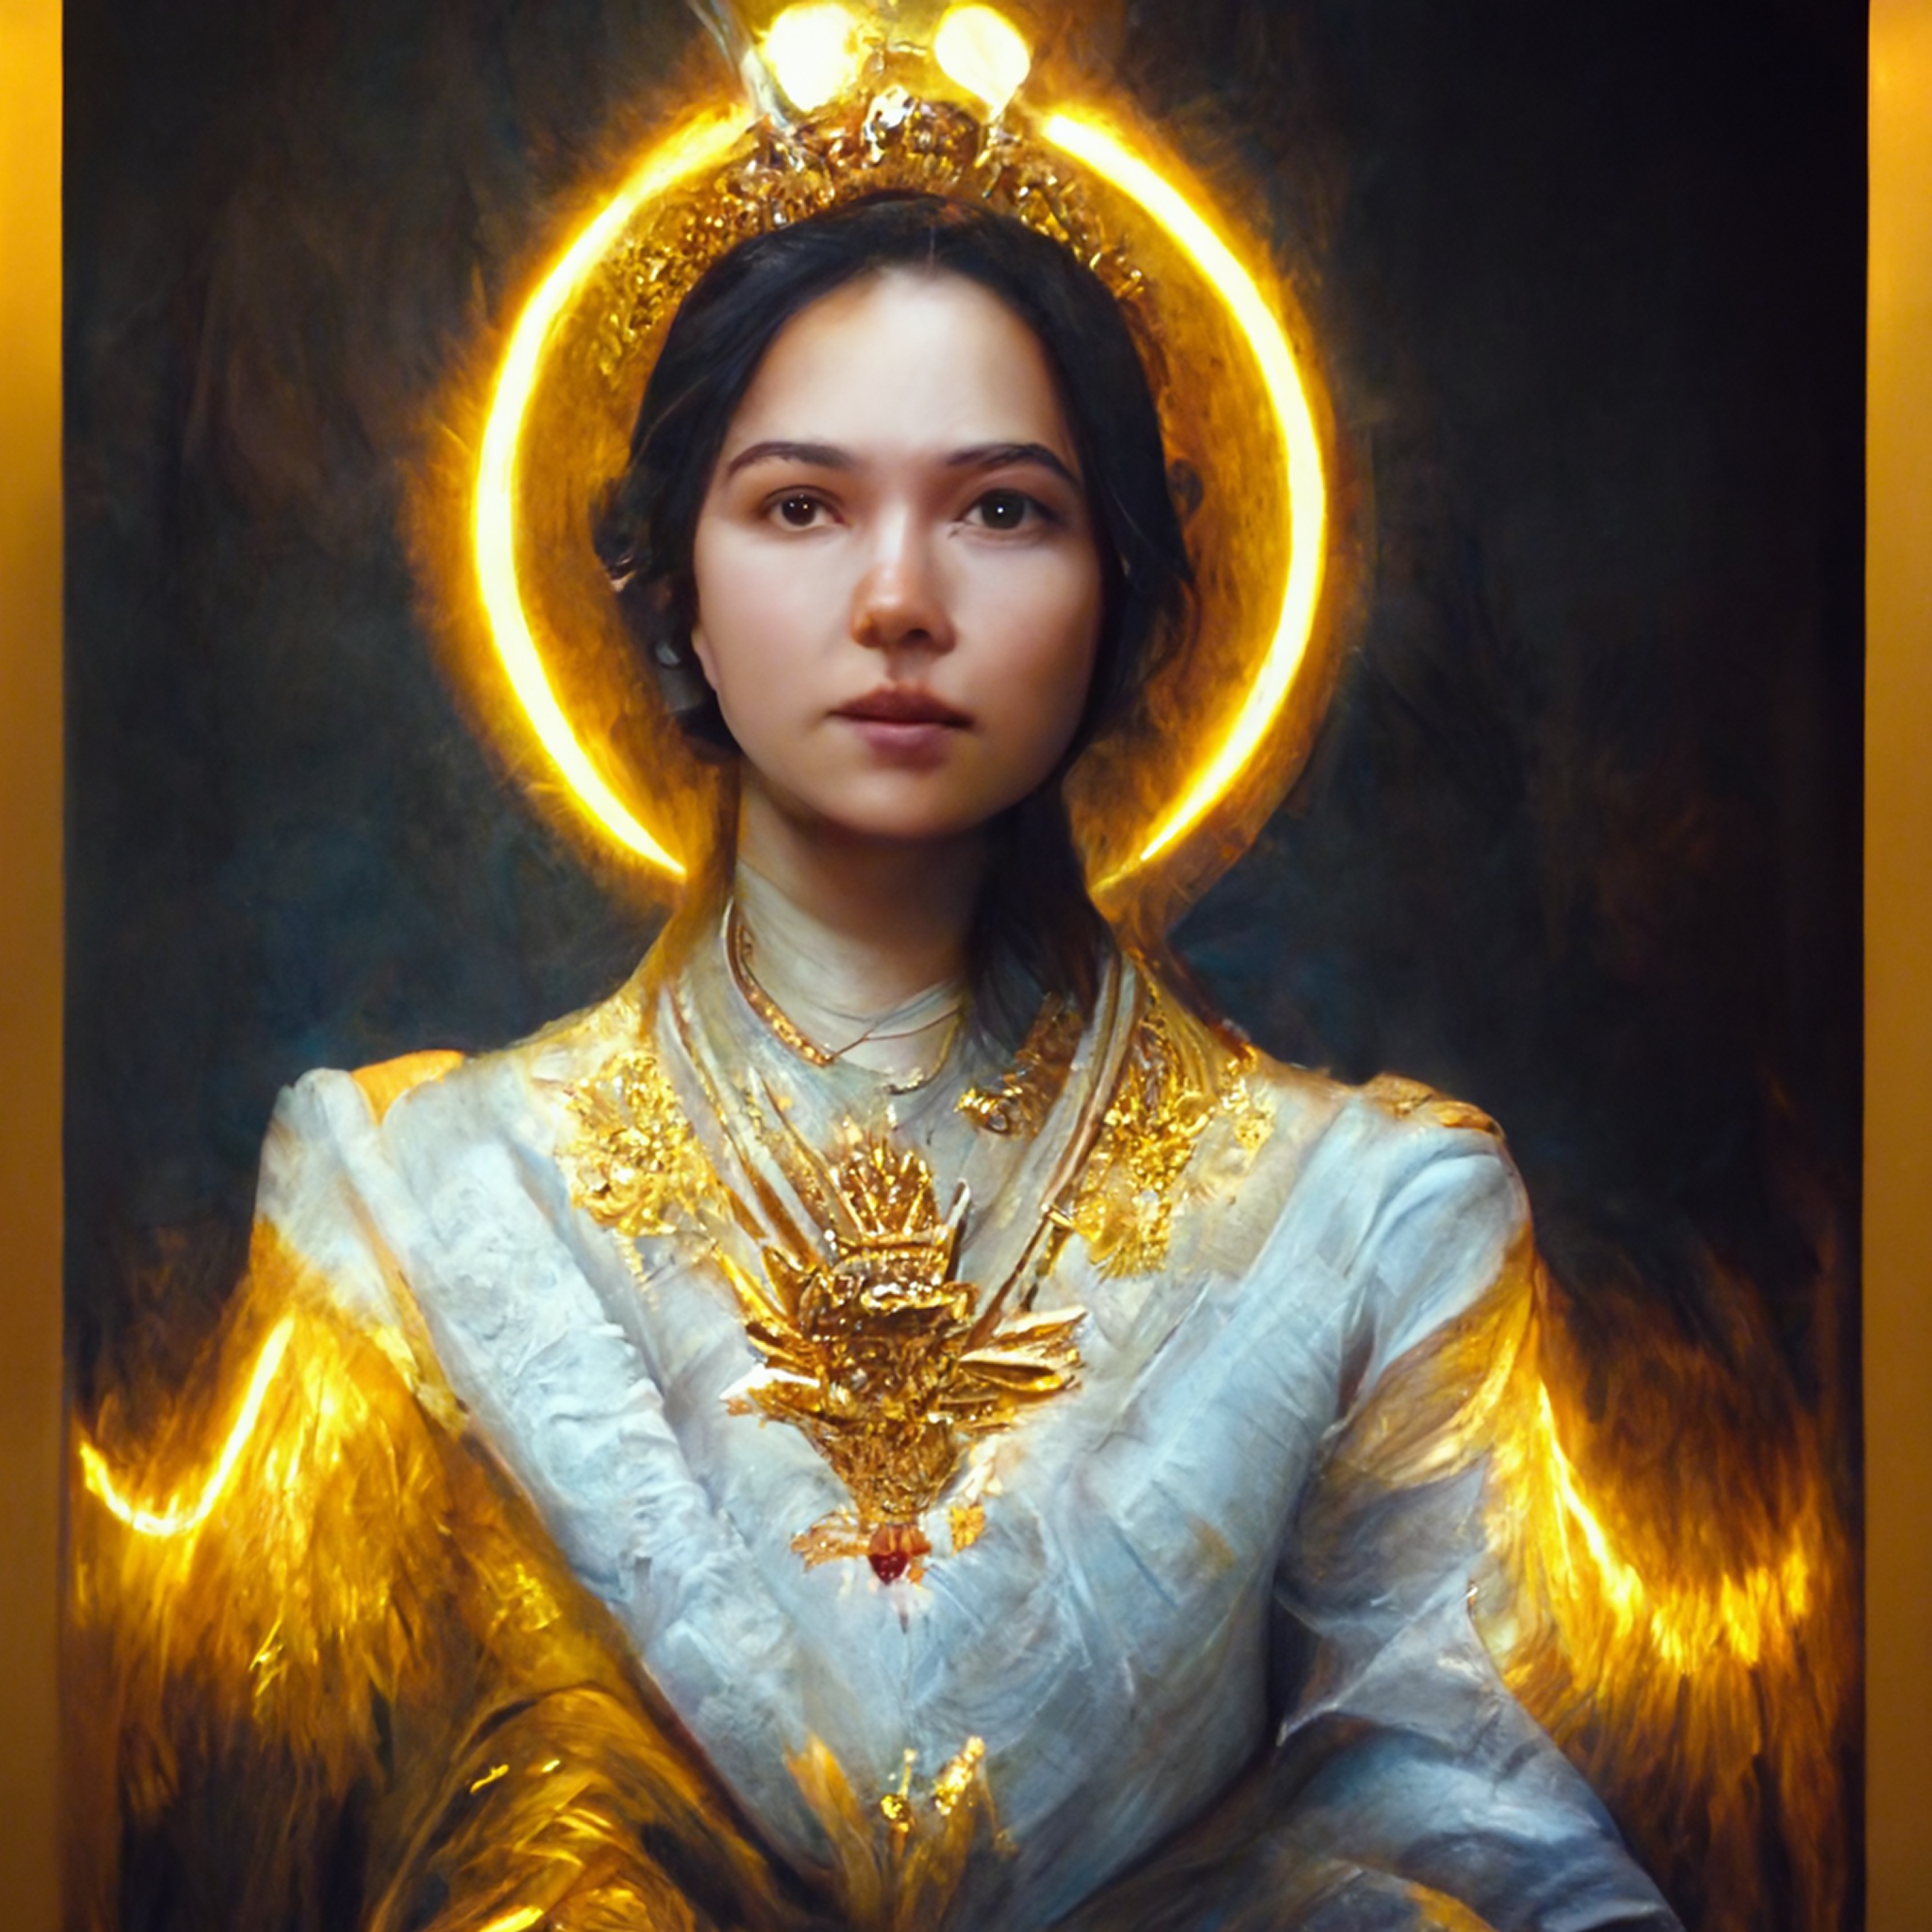 Virgin Mary on Gold Throne No. 1 AI Art 1/1 created by Sollog